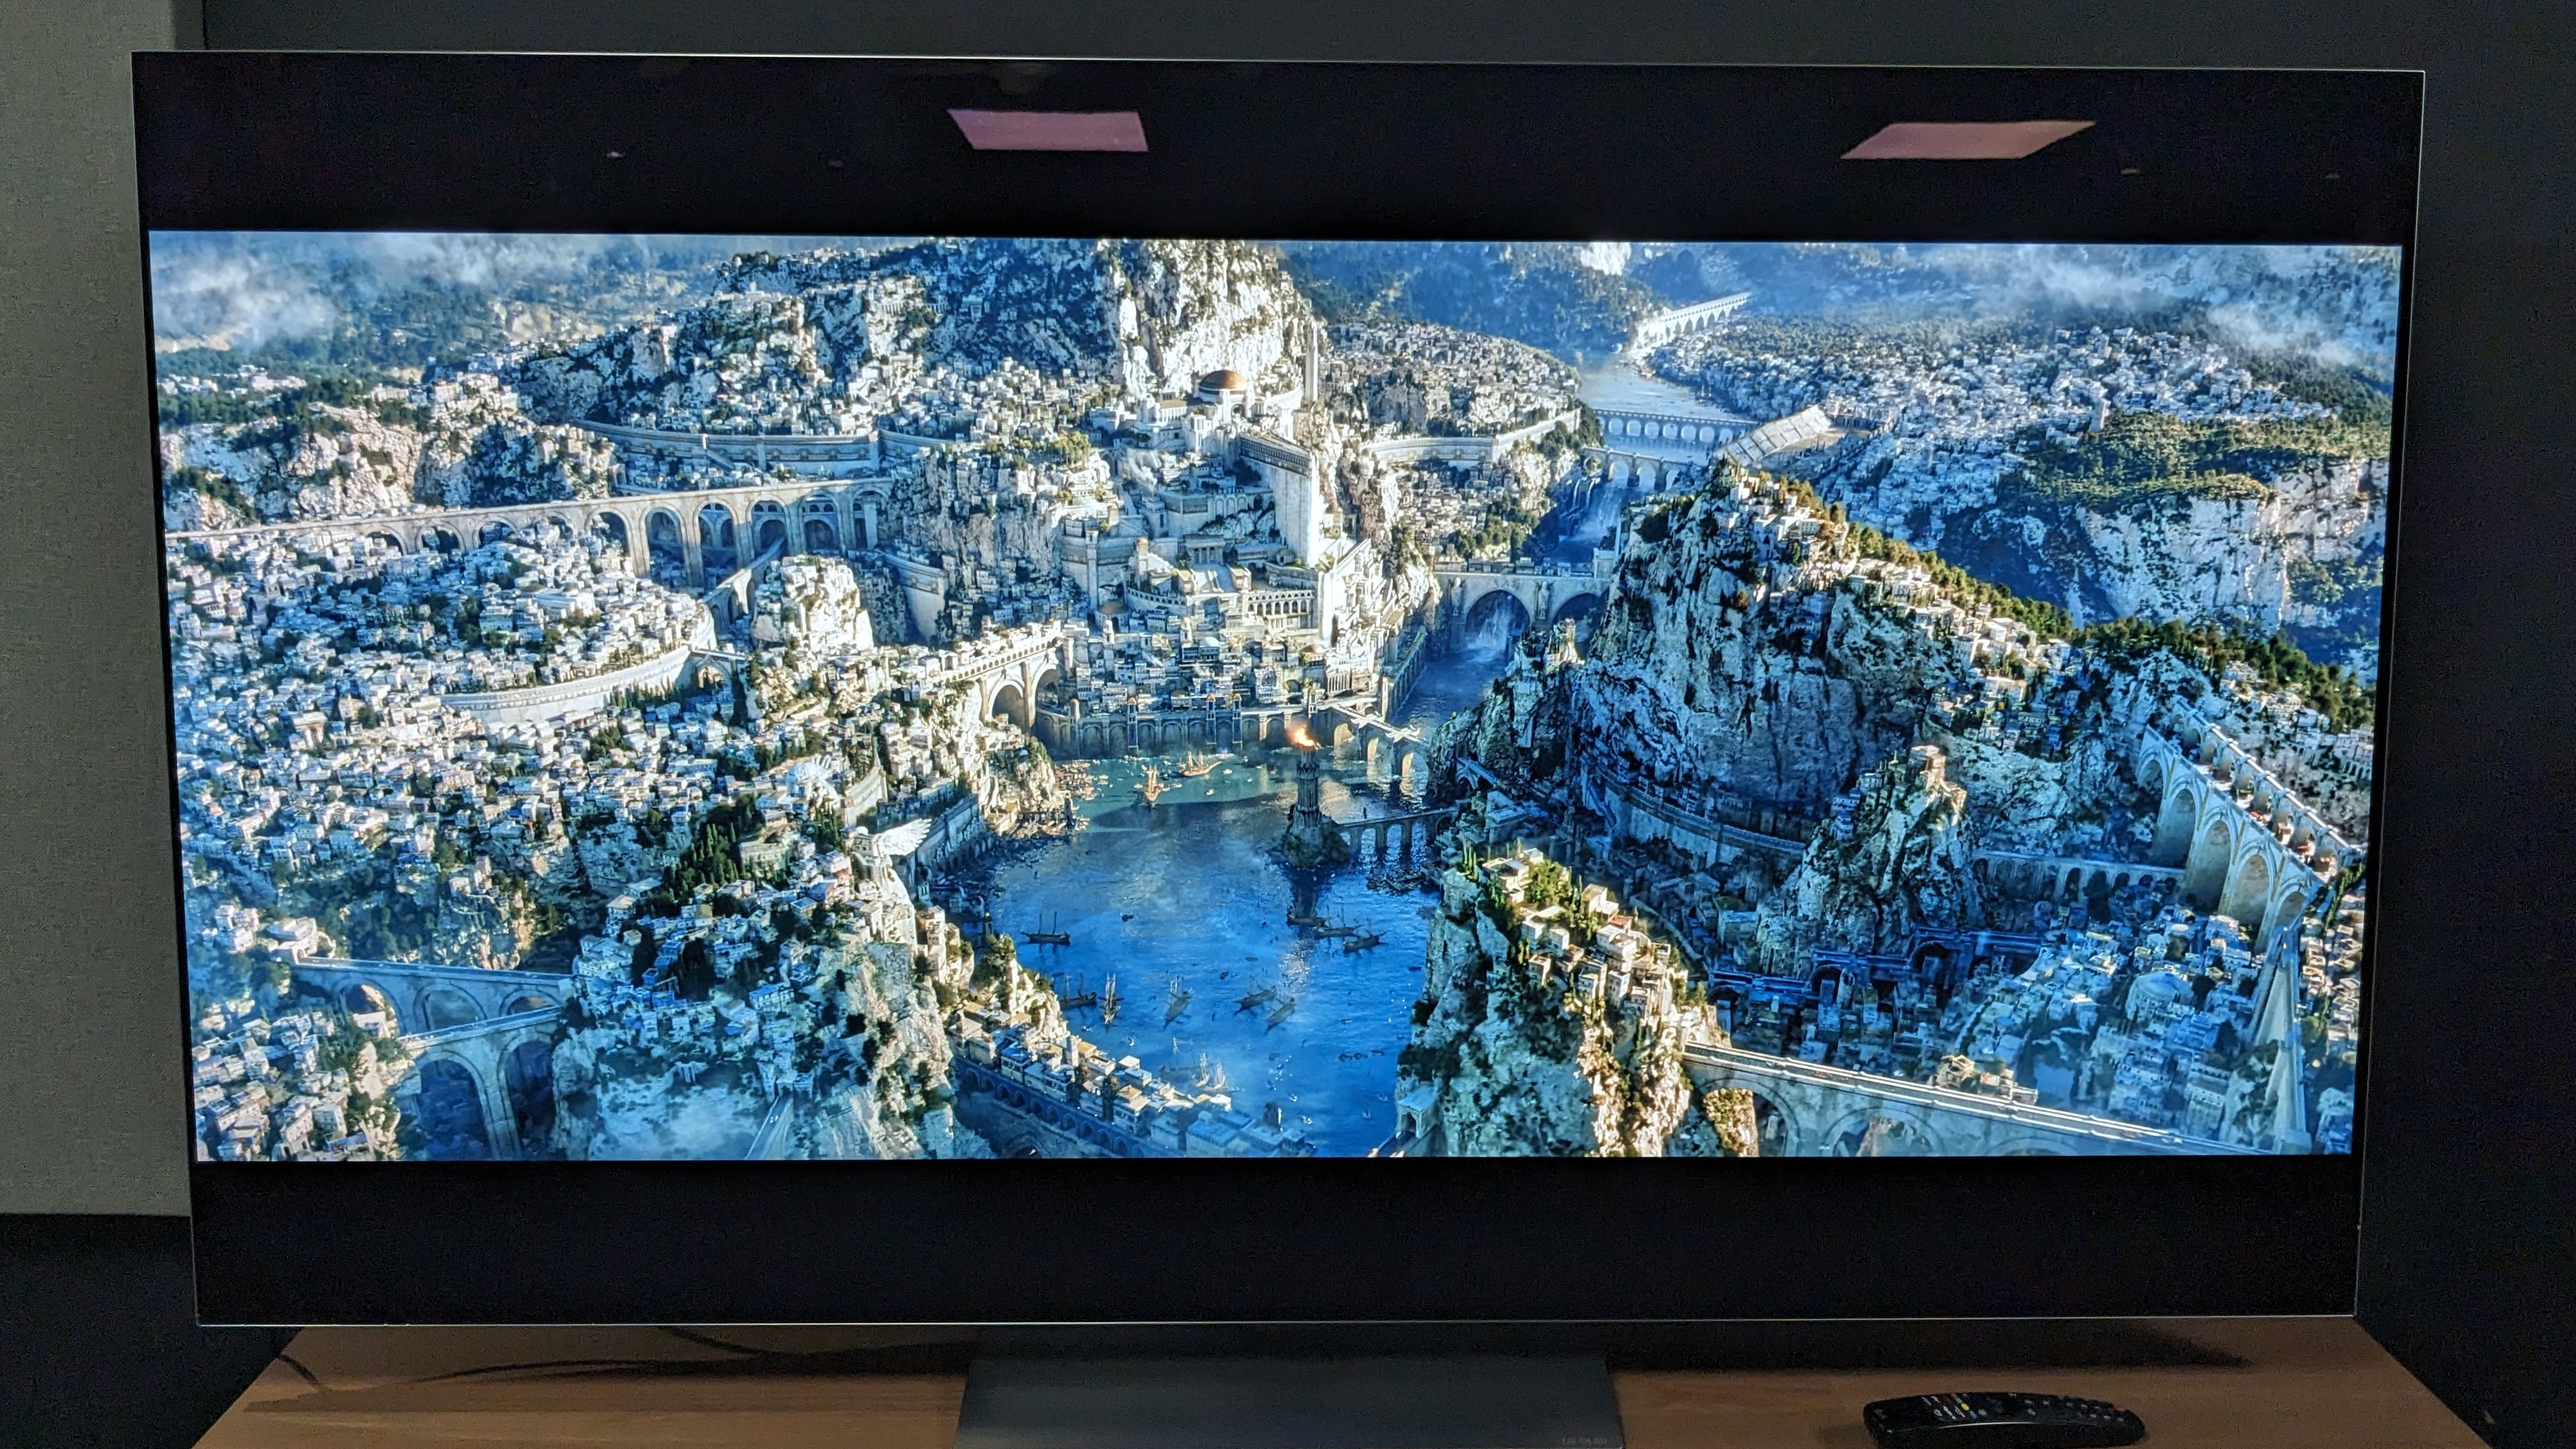 LG G3 with mountainous landscape on screen